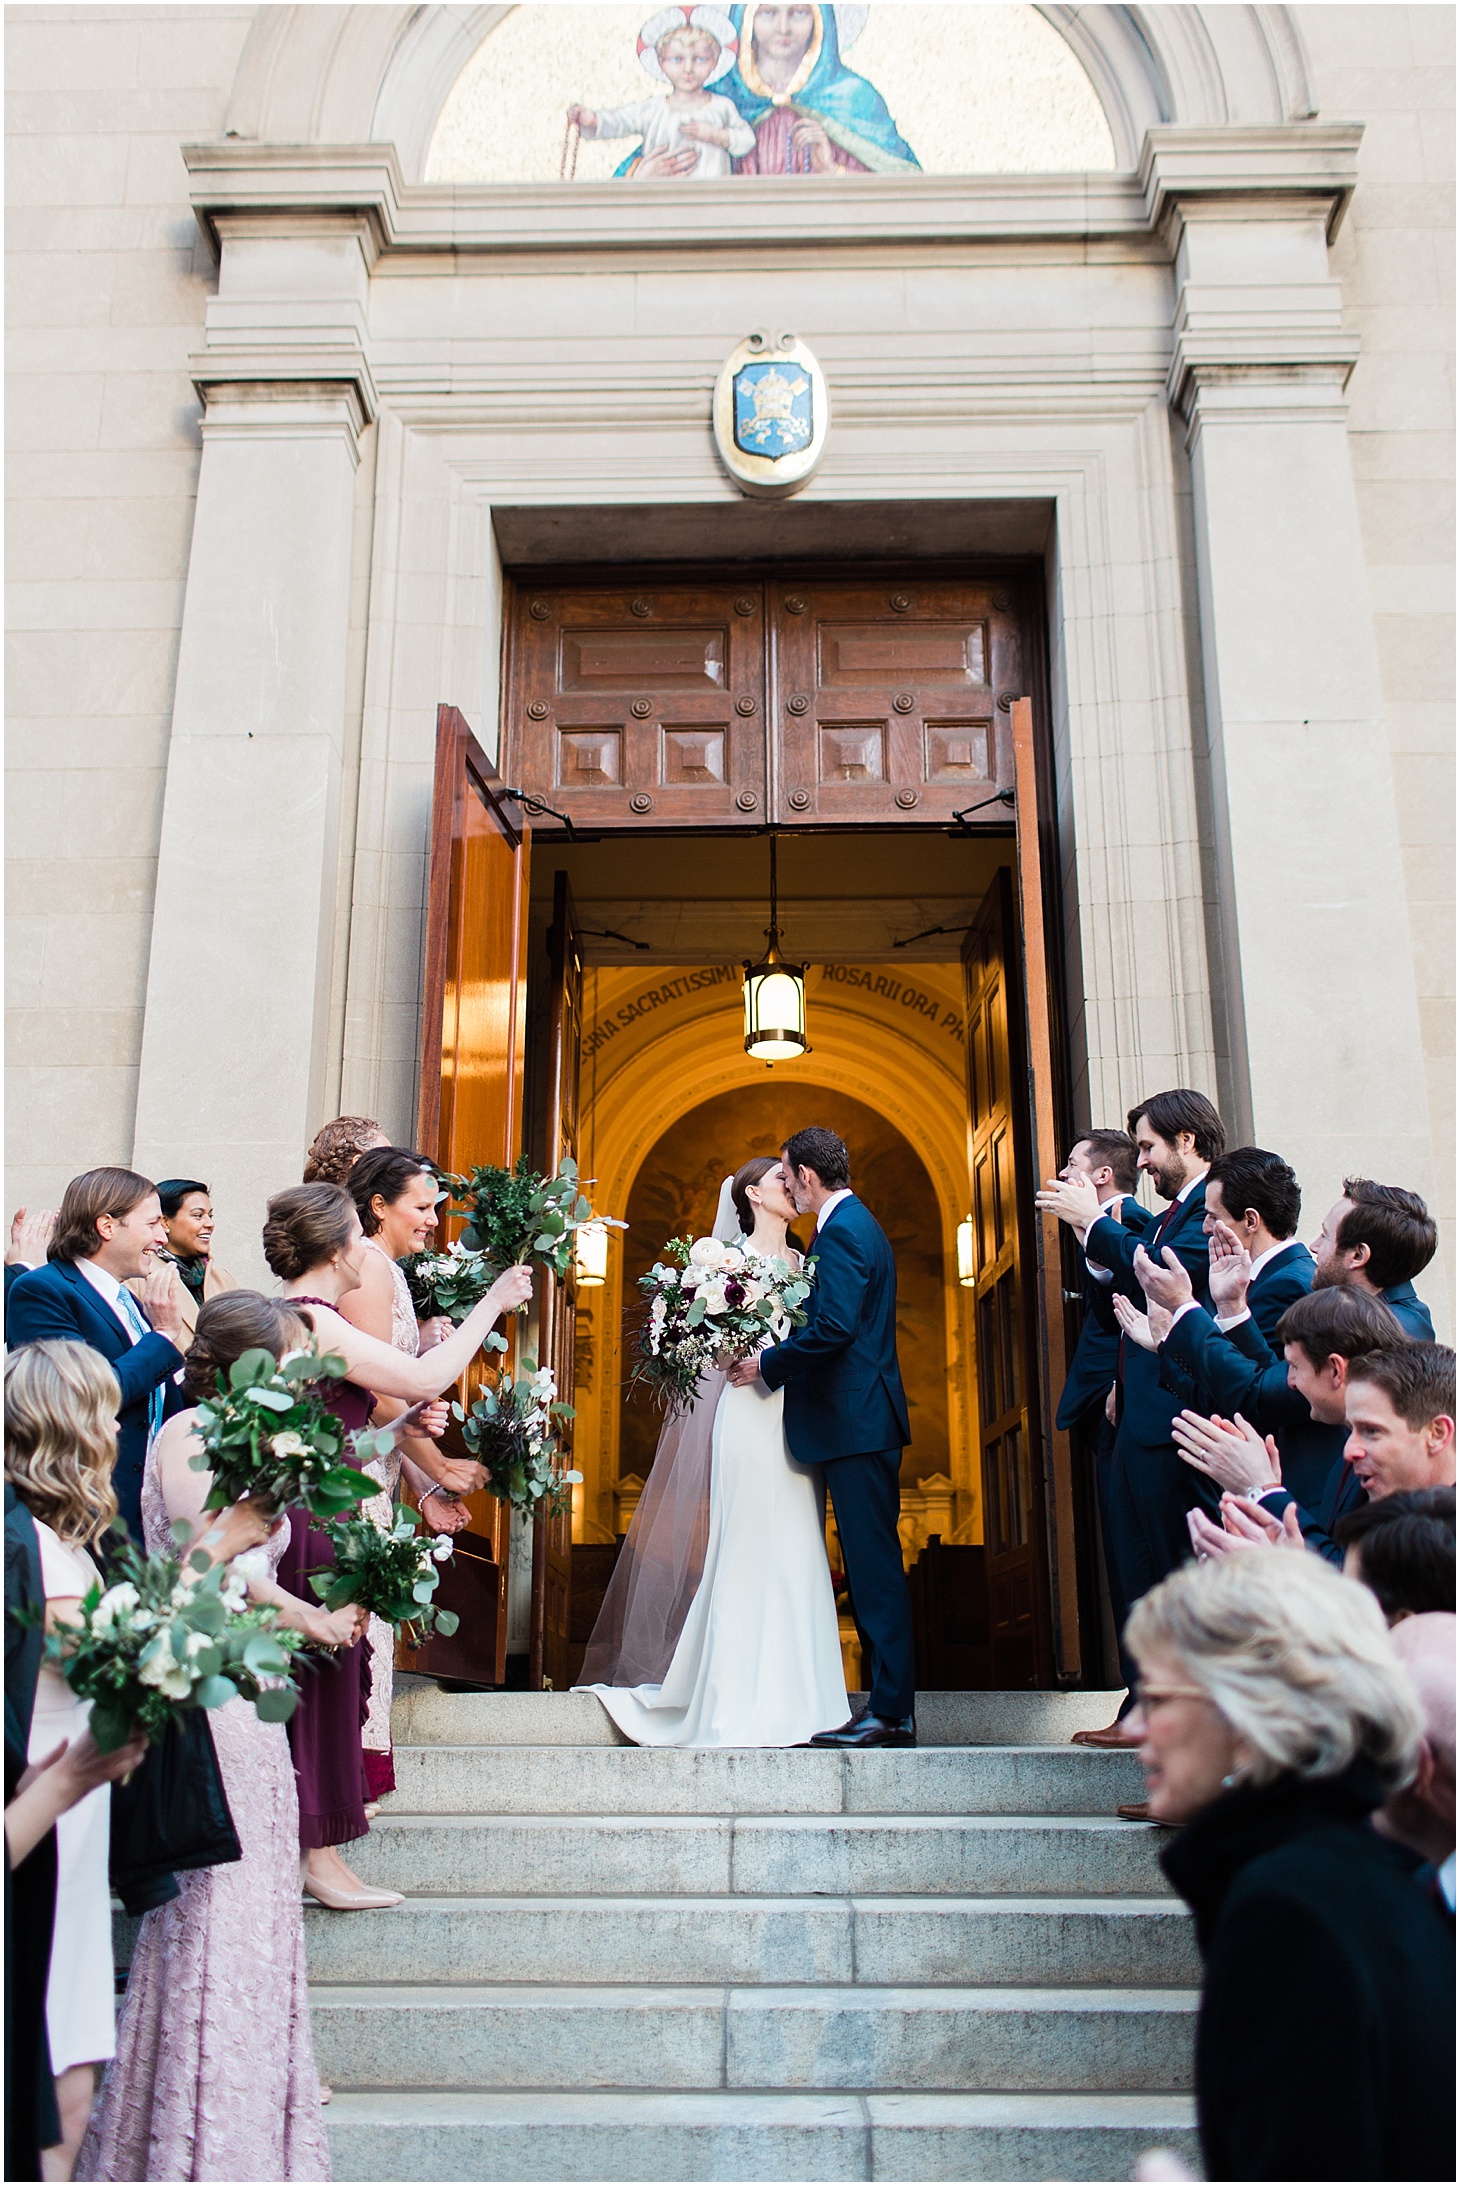 Wedding Ceremony at Holy Rosary Church | Burgundy and Blush DC Wedding at District Winery | Sarah Bradshaw Photography